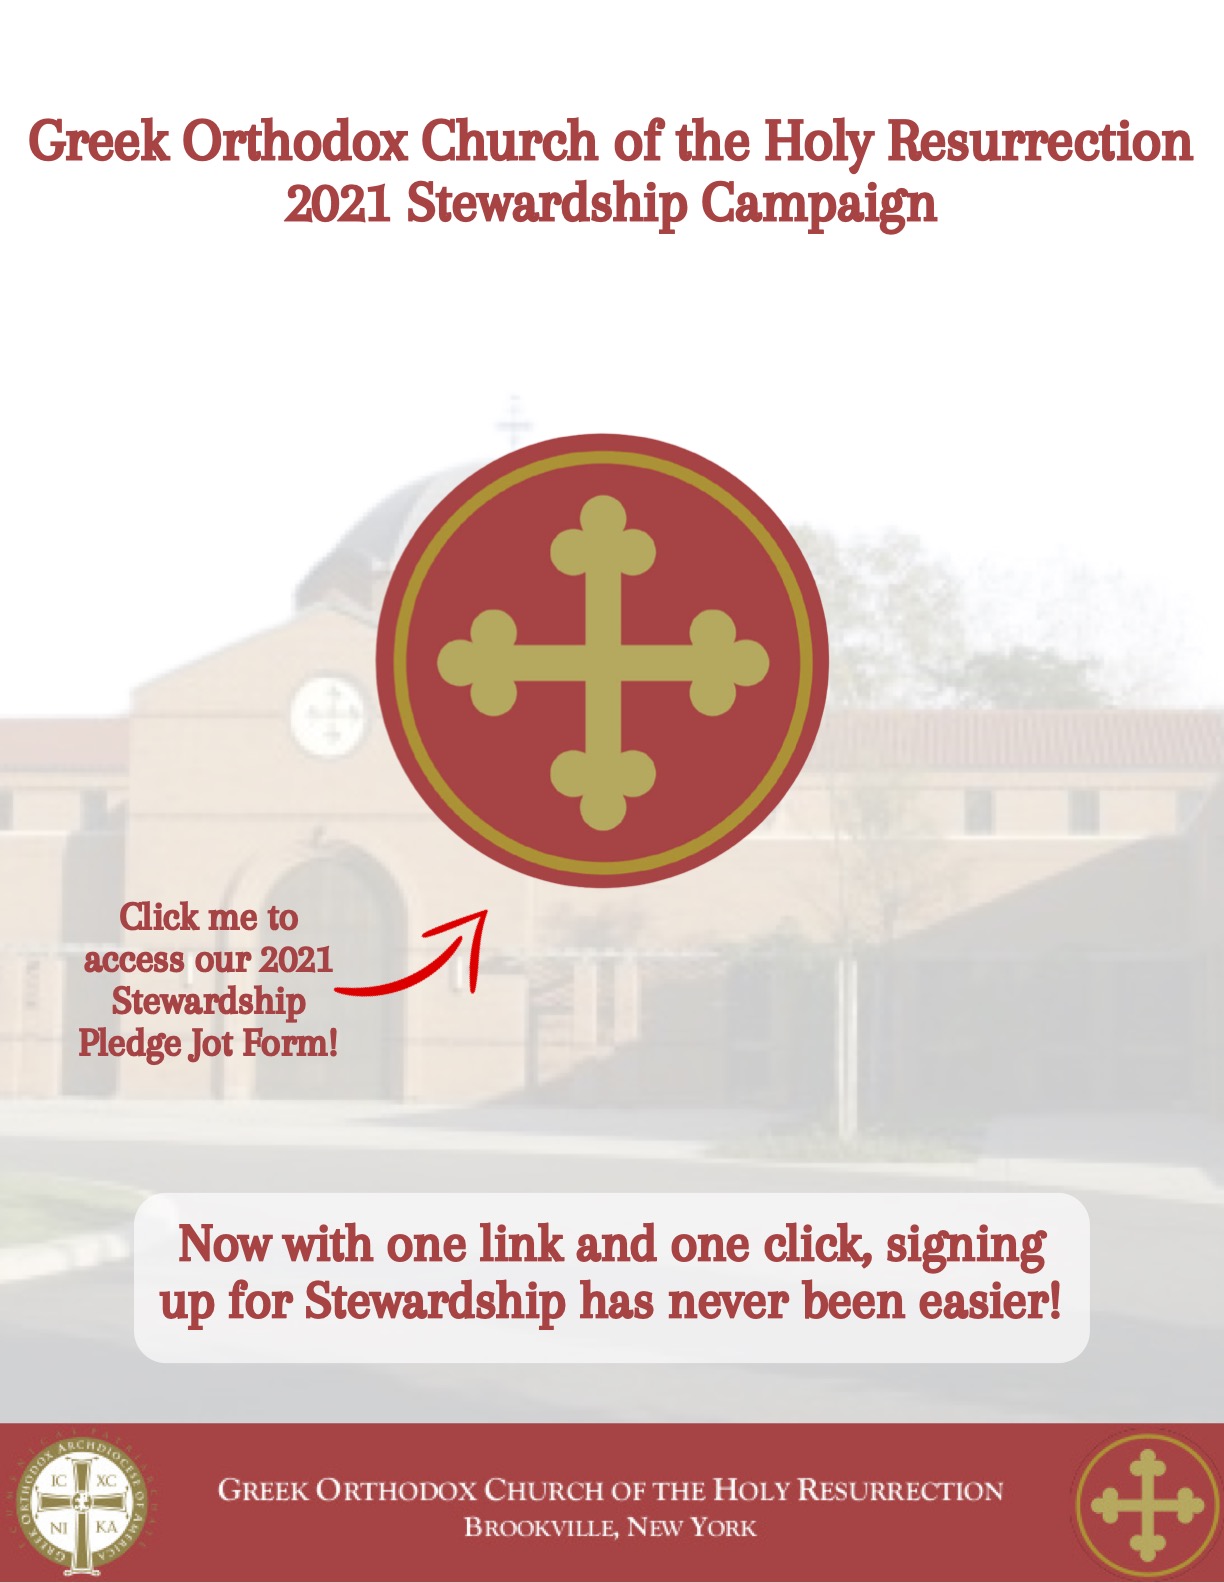 SIGN UP and offer your STEWARDSHIP today!  